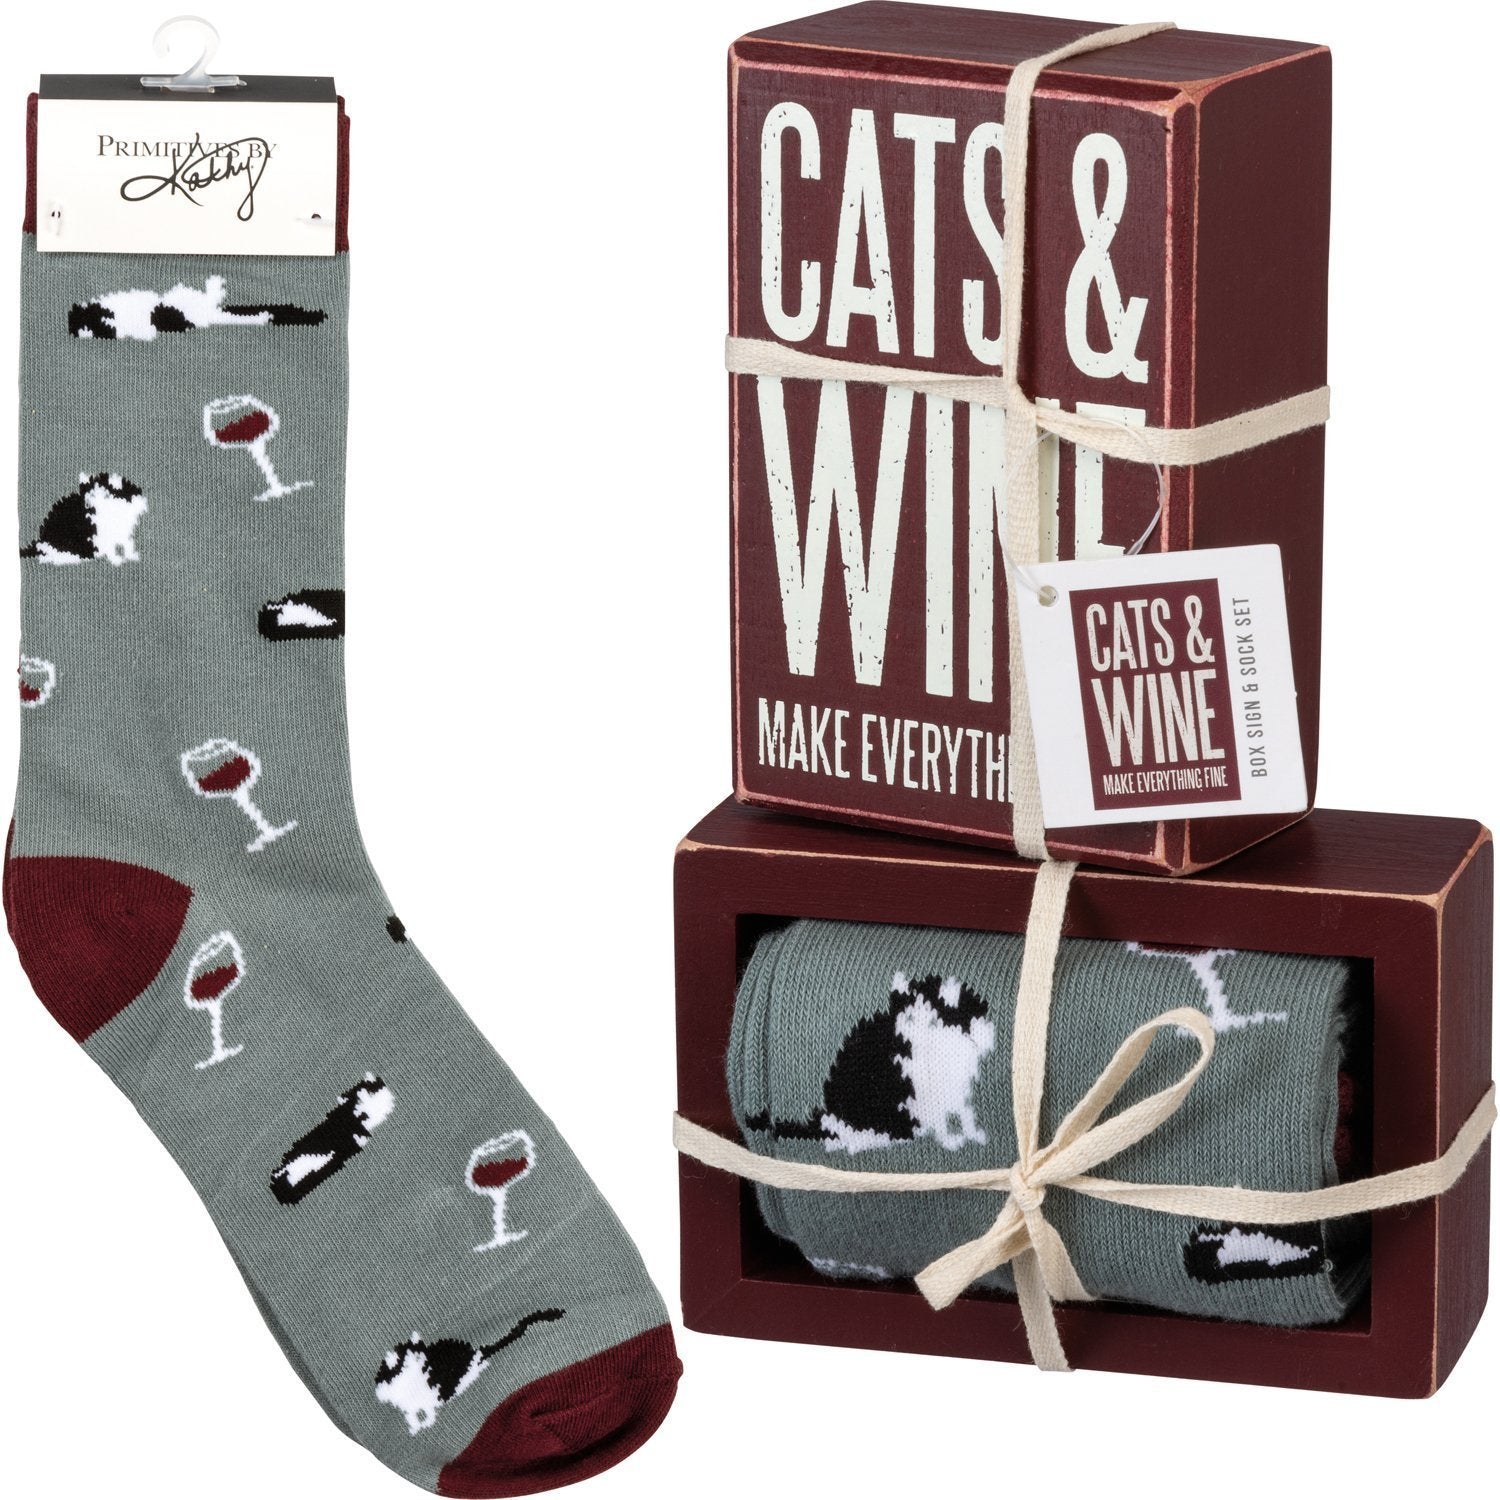 Birthday Gifts for Cat Lovers, Cats And Wine Make Everything Fine Socks And Sign Set